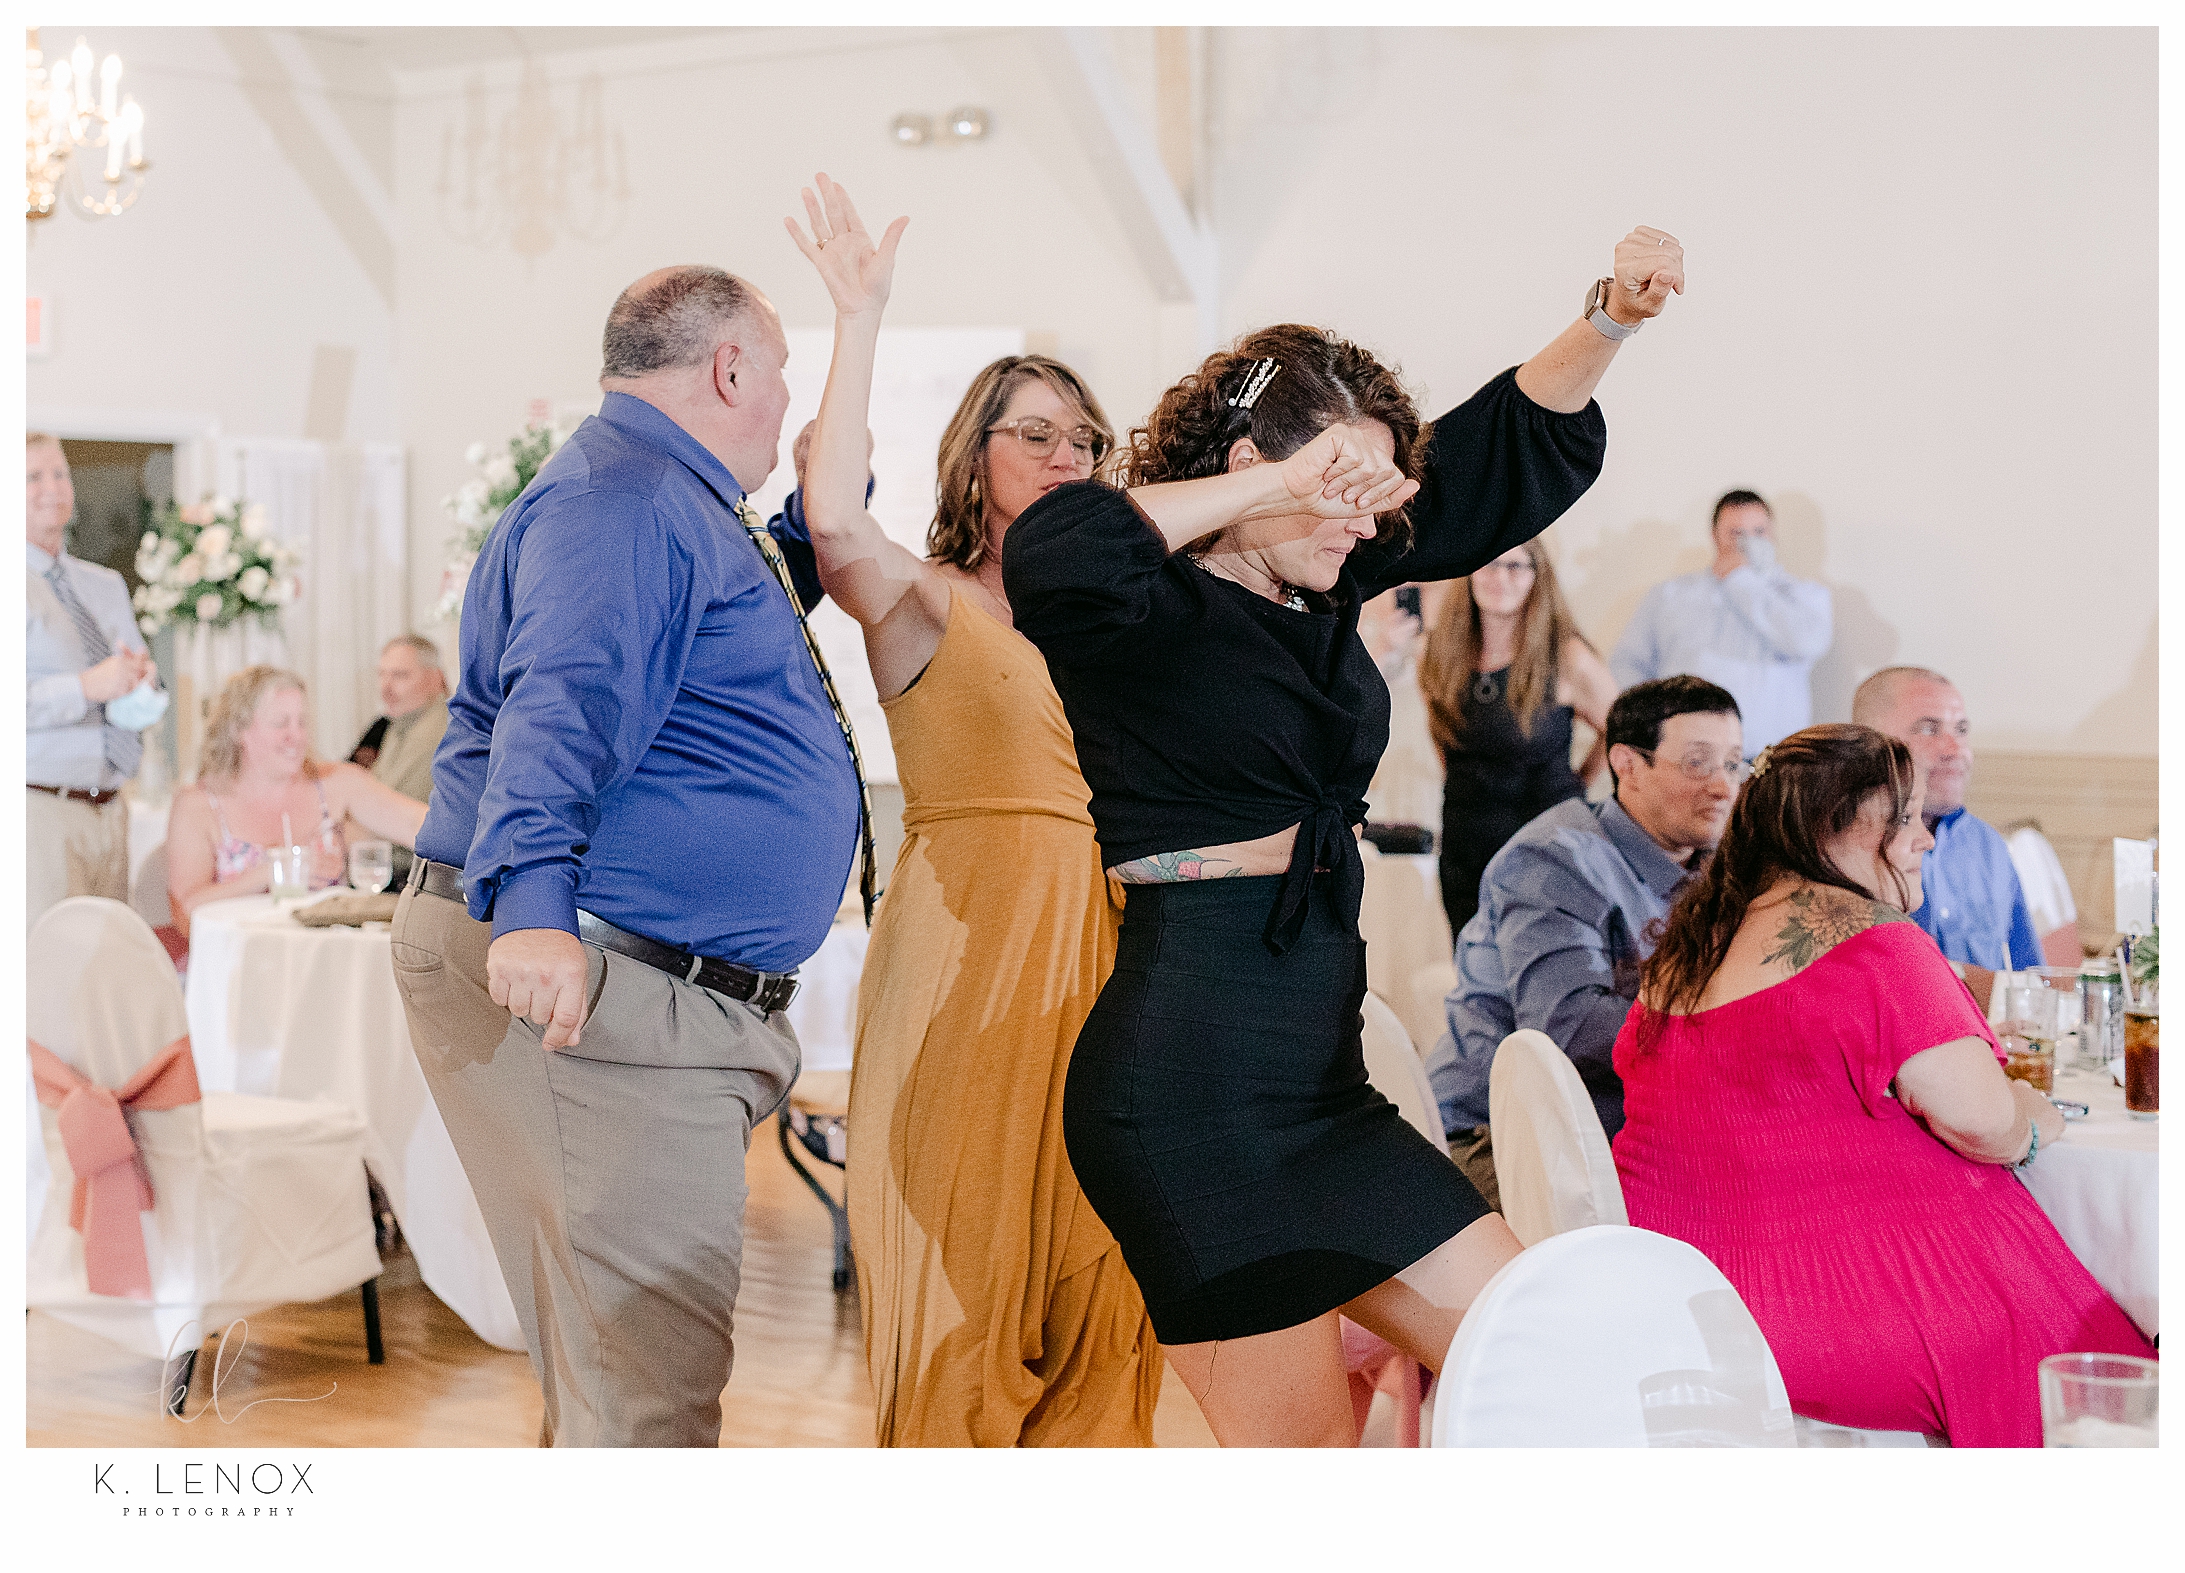 Wedding at the Keene Country Club- Reception guests dancing